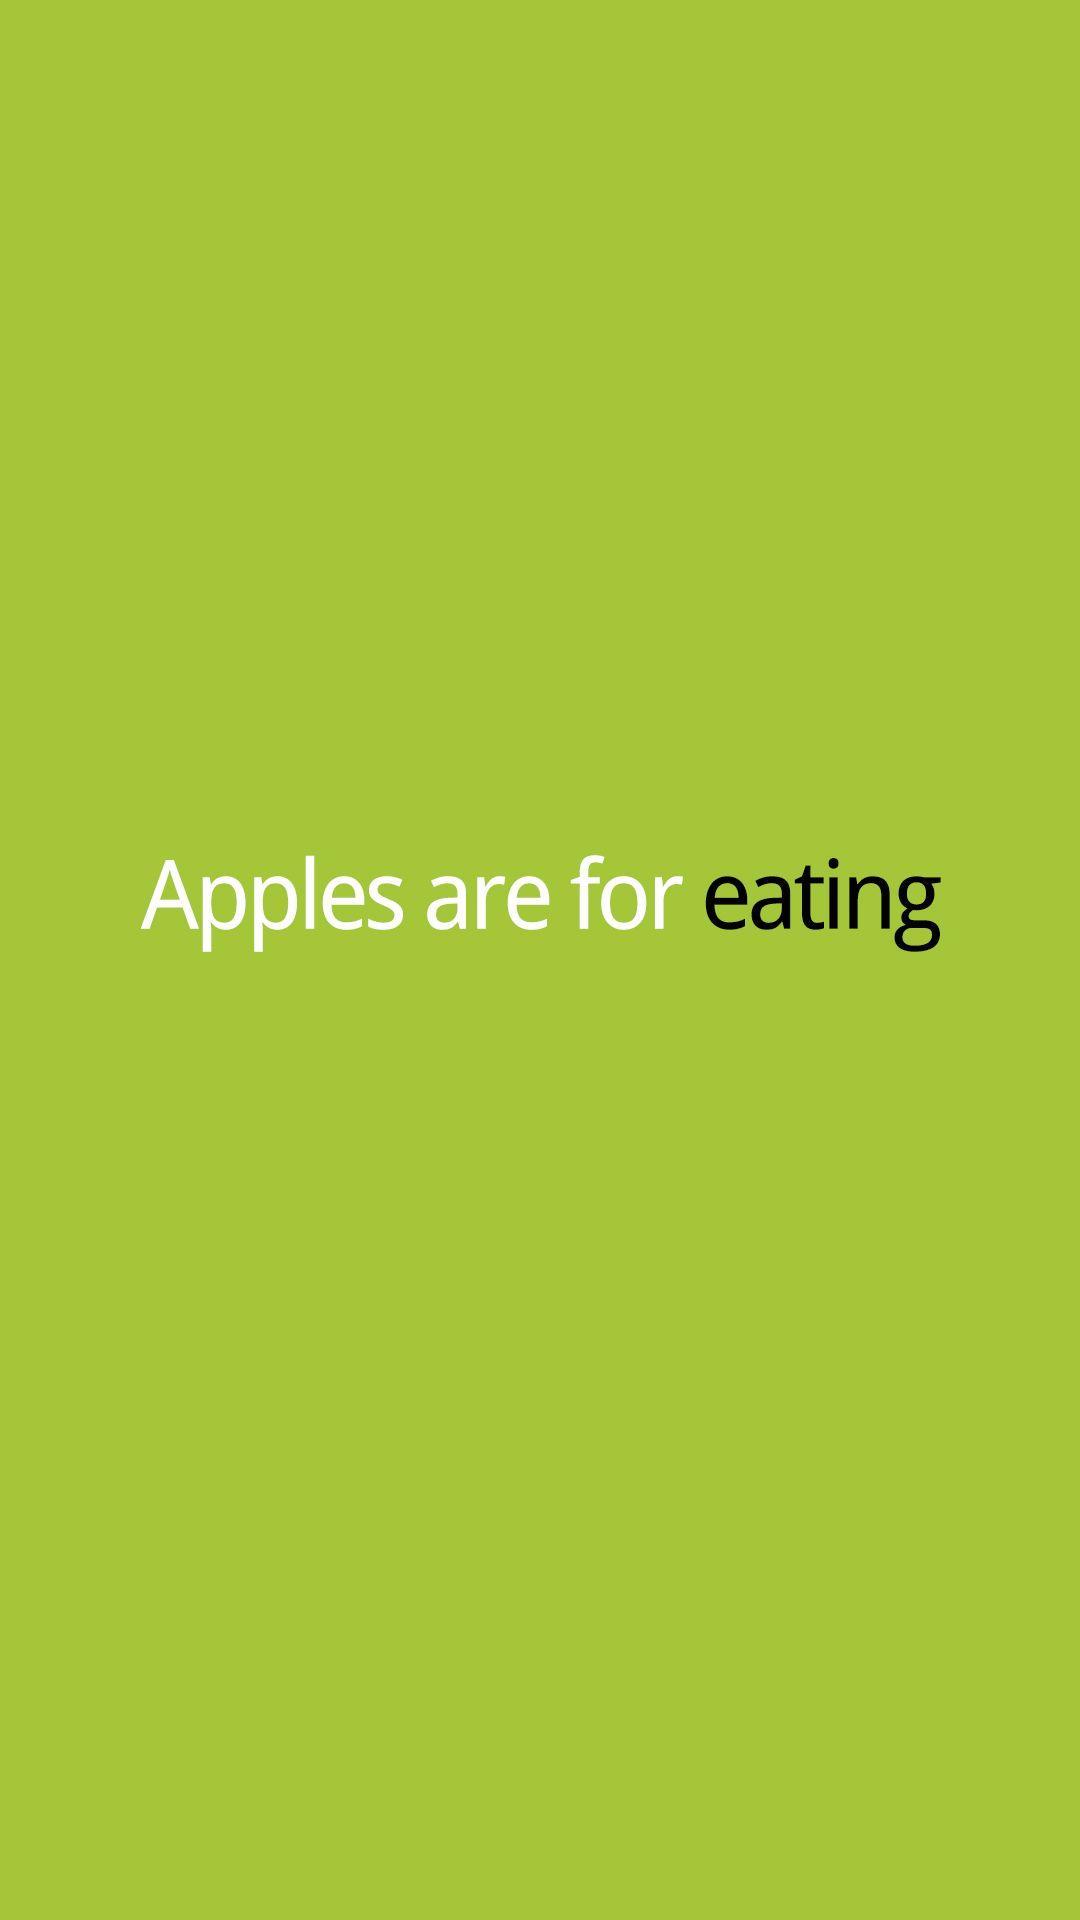 Android eating apple htc one wallpaper, free and easy to